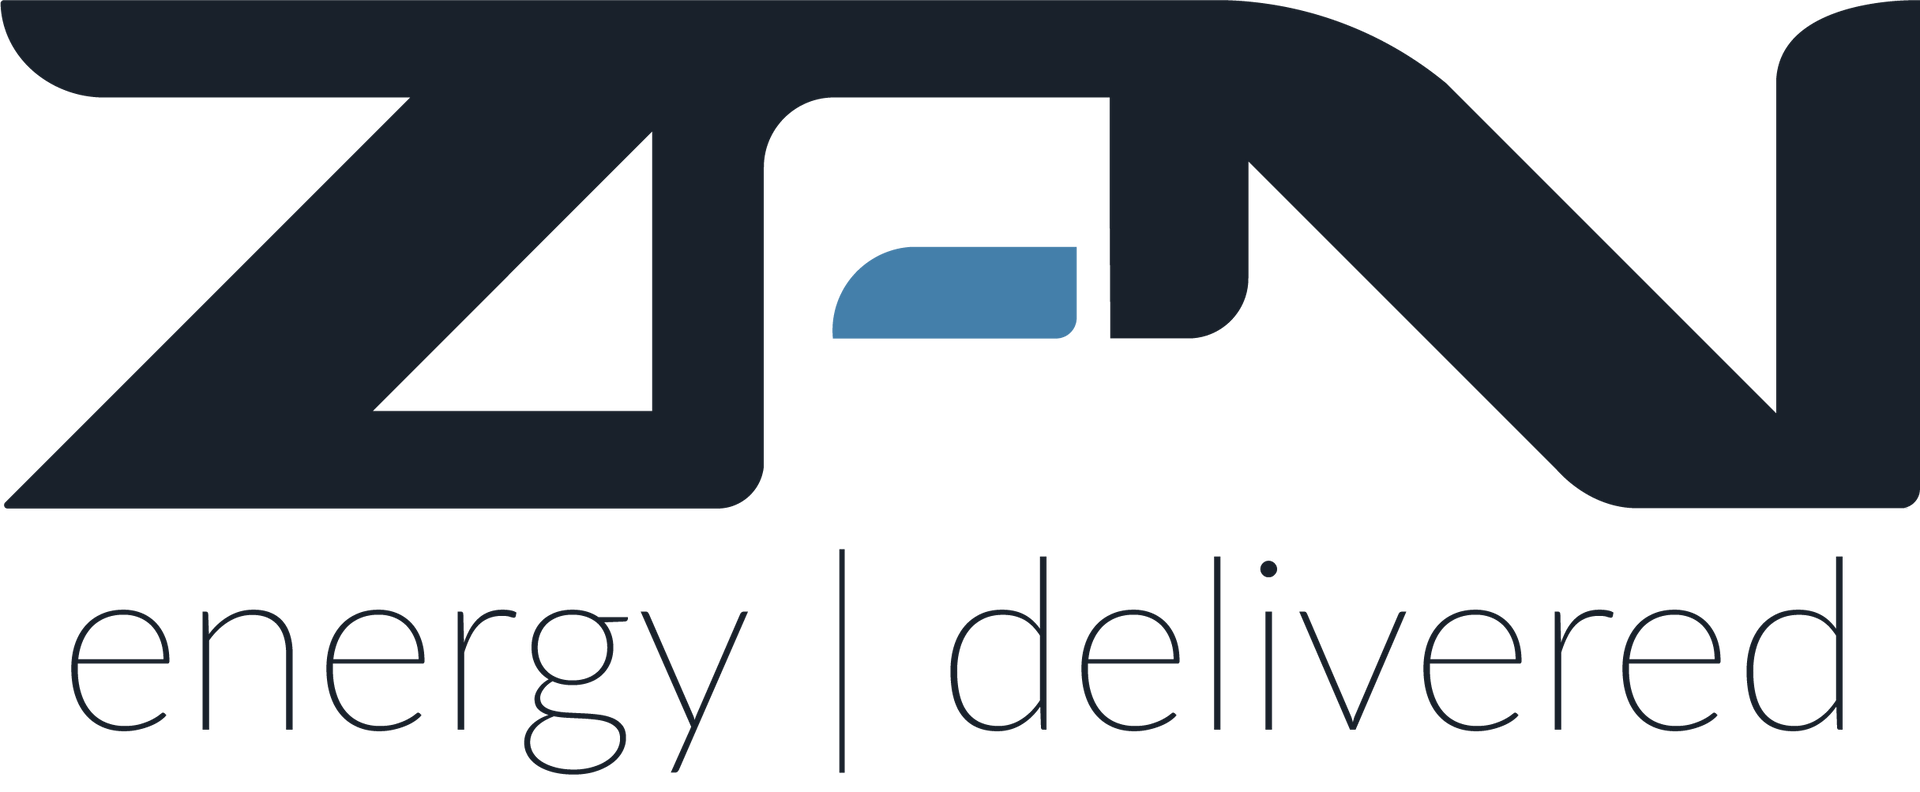 ZPN Energy logo with energy delivered tagline